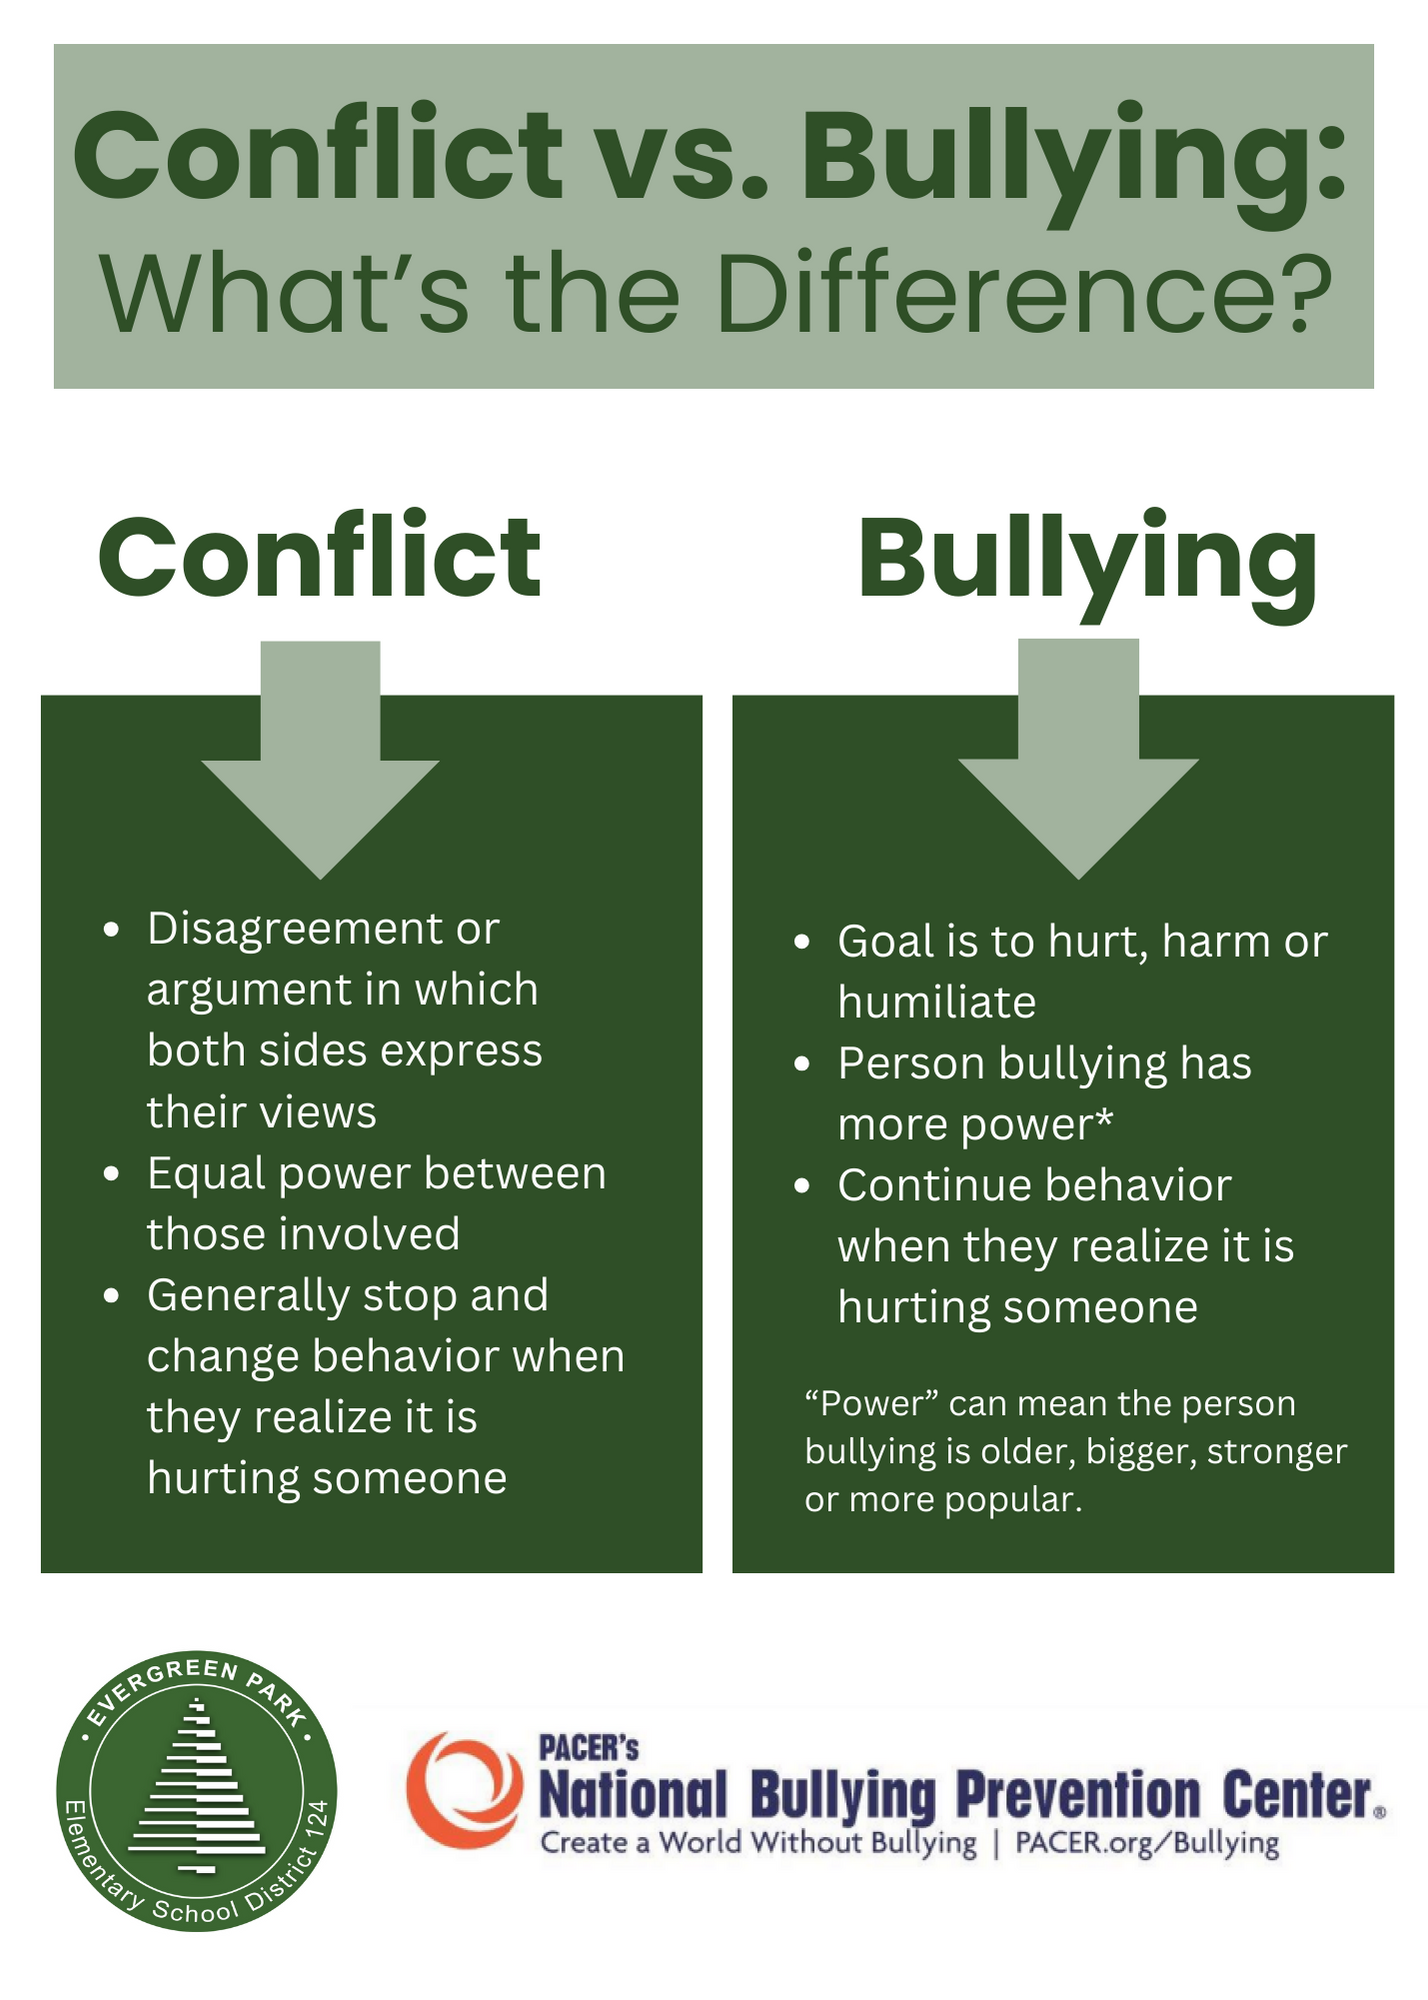 Conflict vs. Bullying